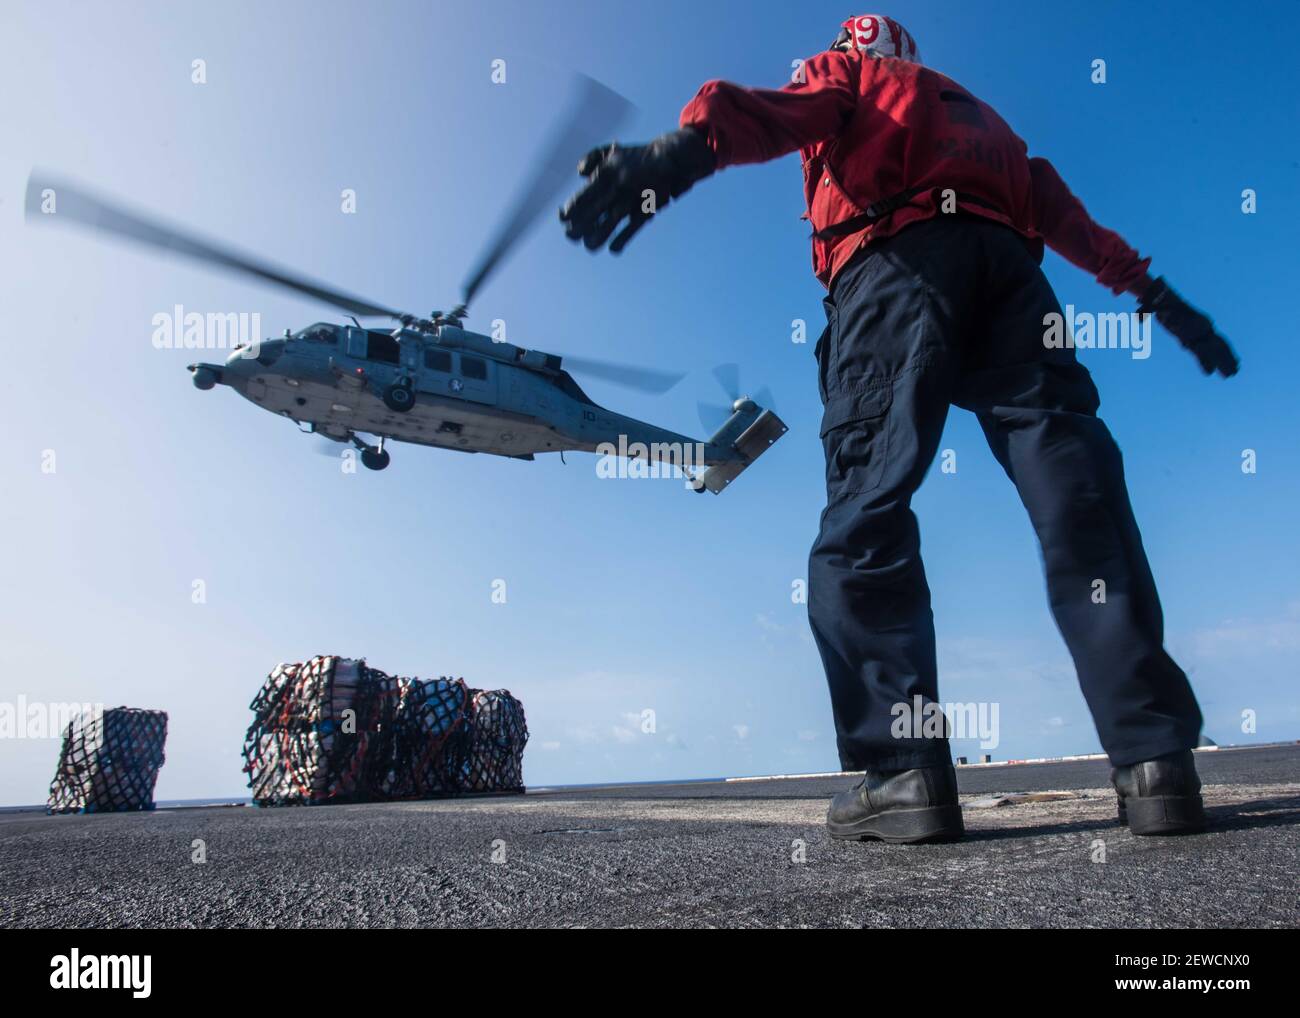 Aviation Ordnanceman Airman Kersan Sorendo directs an MH-60S Sea Hawk assigned to the Chargers of Helicopter Sea Combat Squadron (HSC) 14 during an replenishment-at-sea with USNS Henry J. Kaiser (T-AO 187) on USS John C. Stennis' (CVN 74) flight deck. Stock Photo